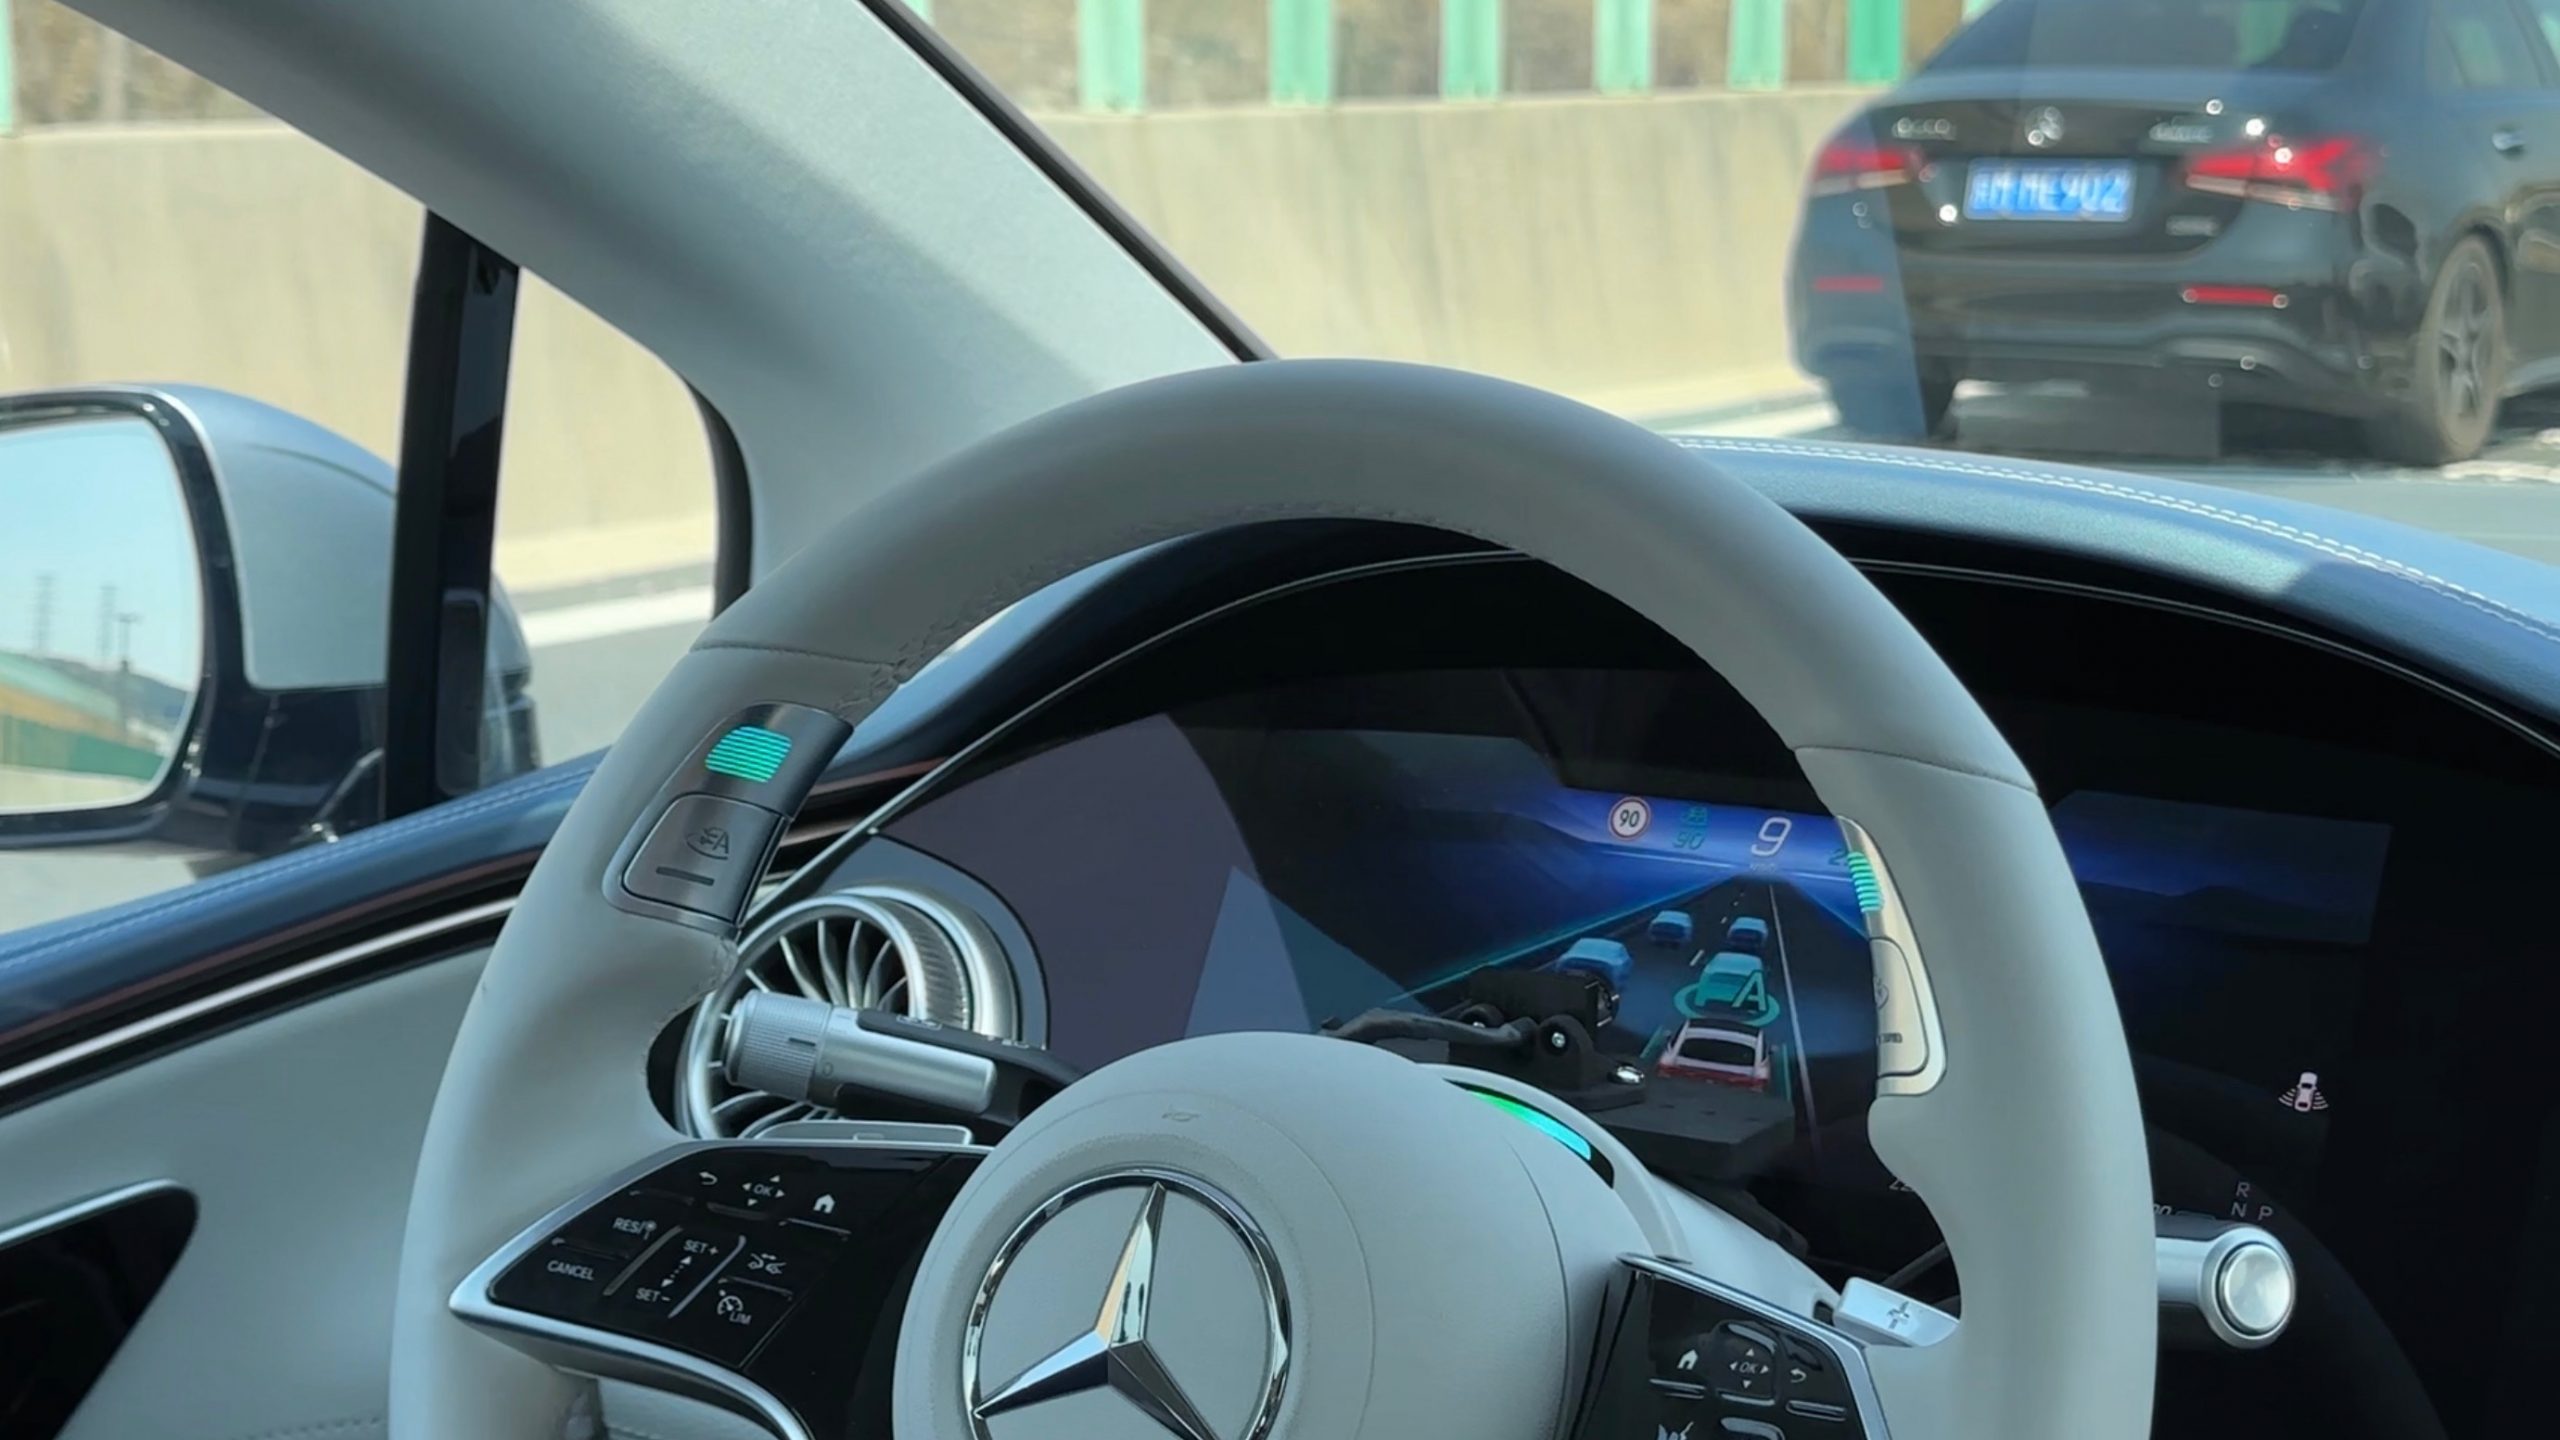 Mercedes-Benz Introduces L3 Autonomous Driving Capability: What You Need to Know